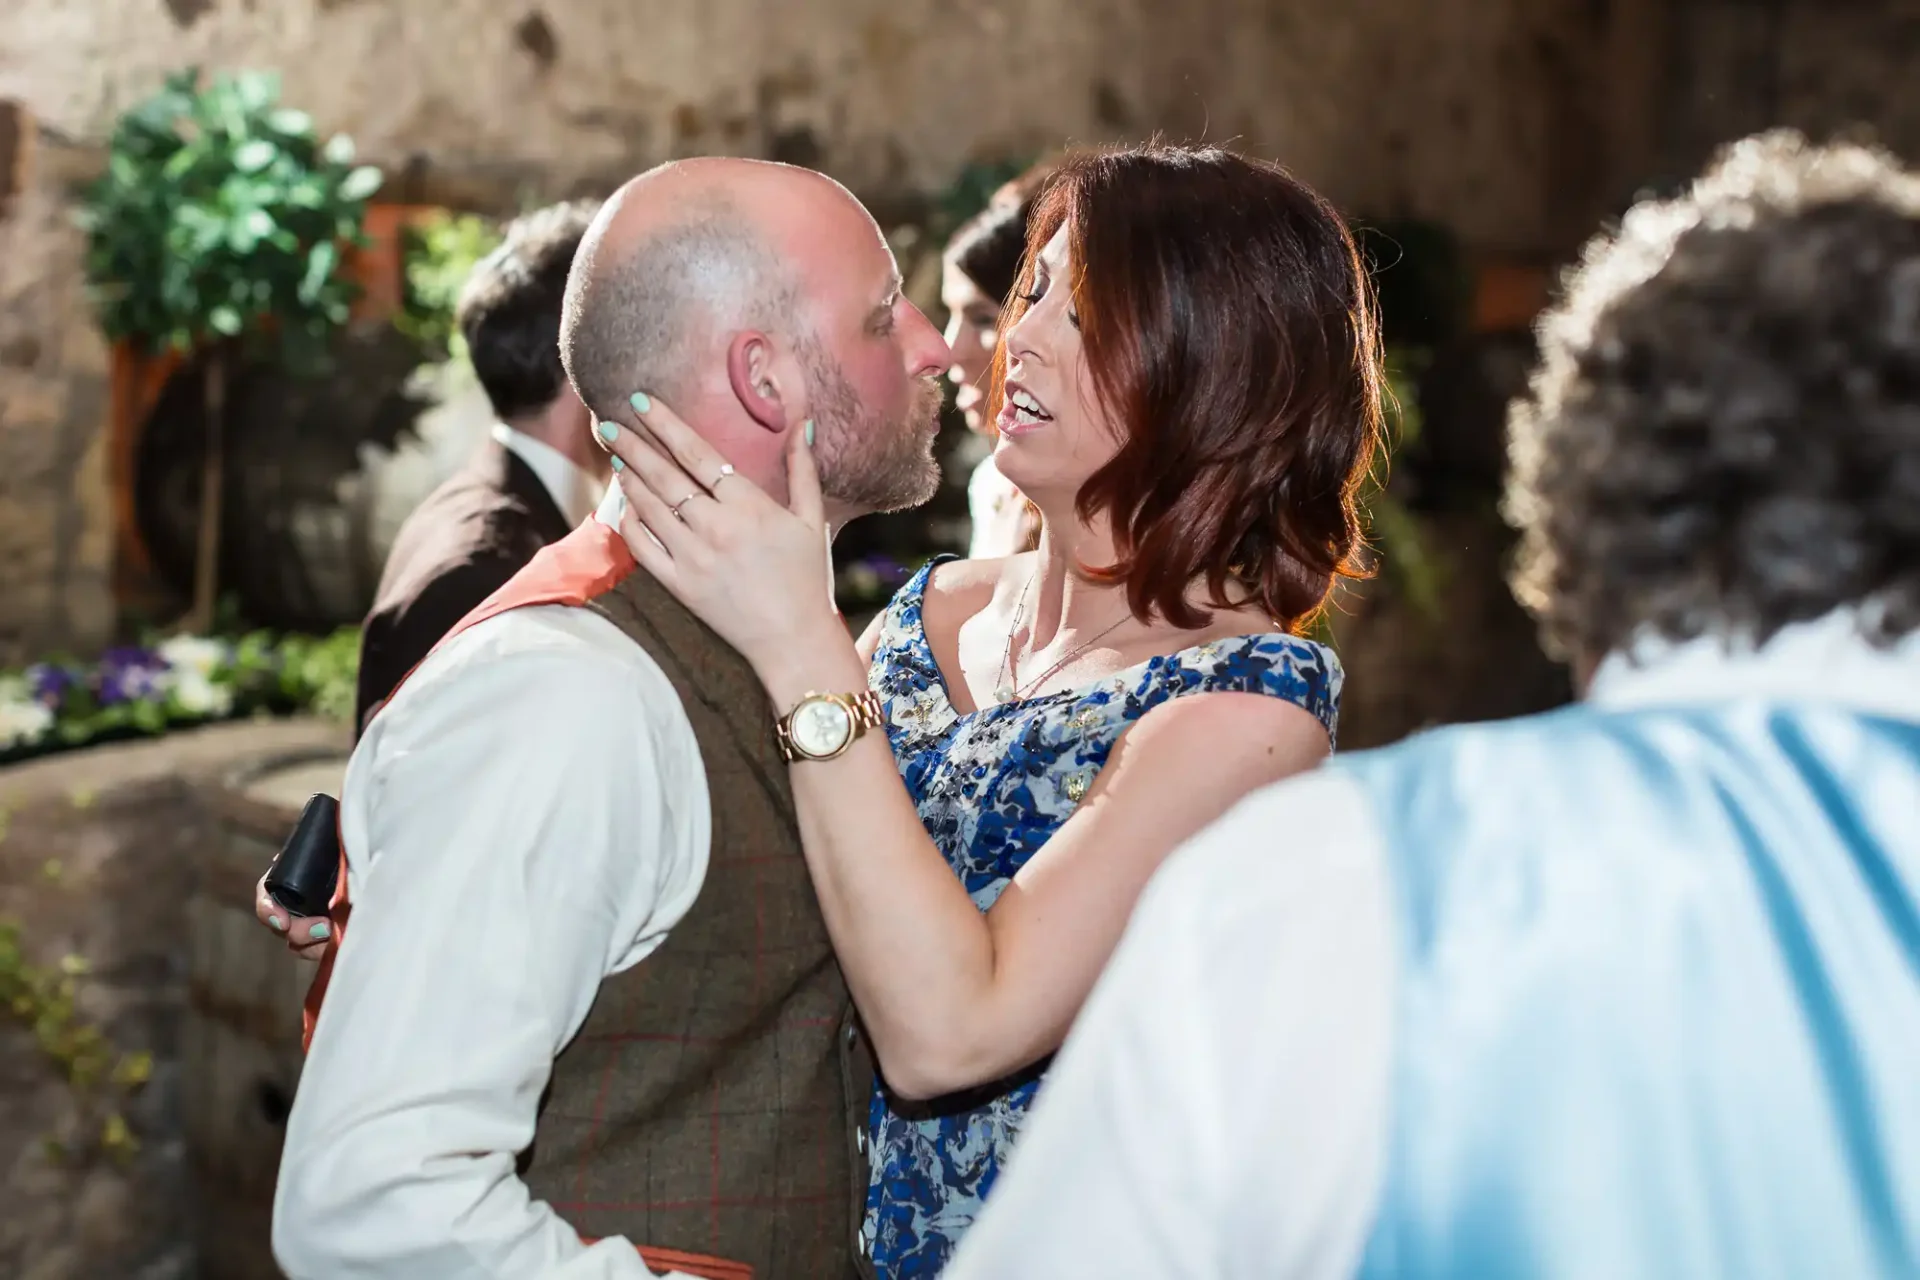 A couple kisses affectionately at an event, surrounded by guests in a rustic, plant-decorated setting.